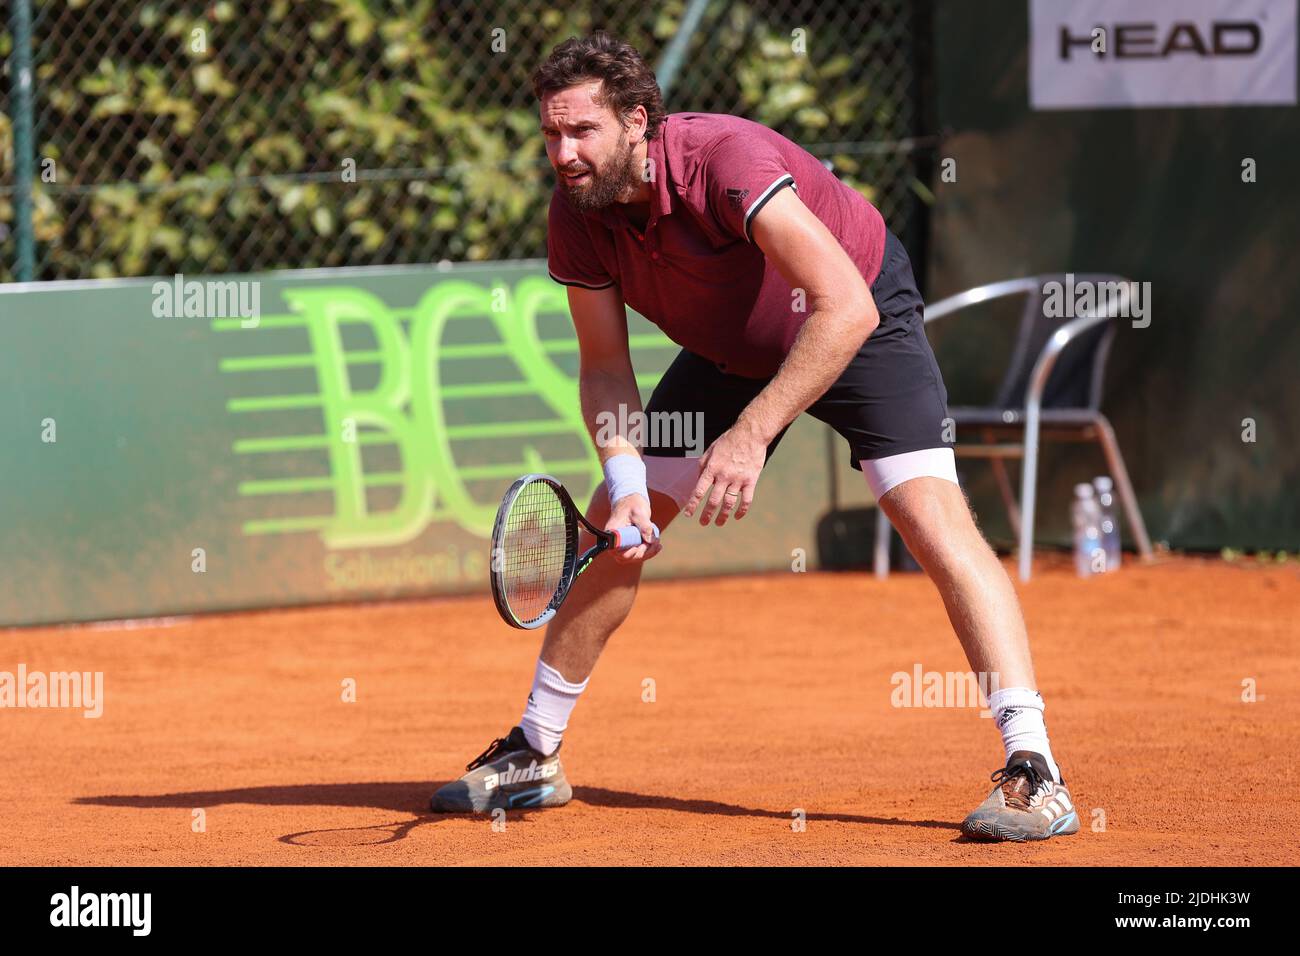 Milan, Italy. 20th June, 2022. Italy, Milan, june 20 2022: Ernests Gulbis  during tennis match E. GULBIS (LAT) vs J. LENZ (GER) 1st round ATP  Challenger Milan at Aspria Club (Photo by